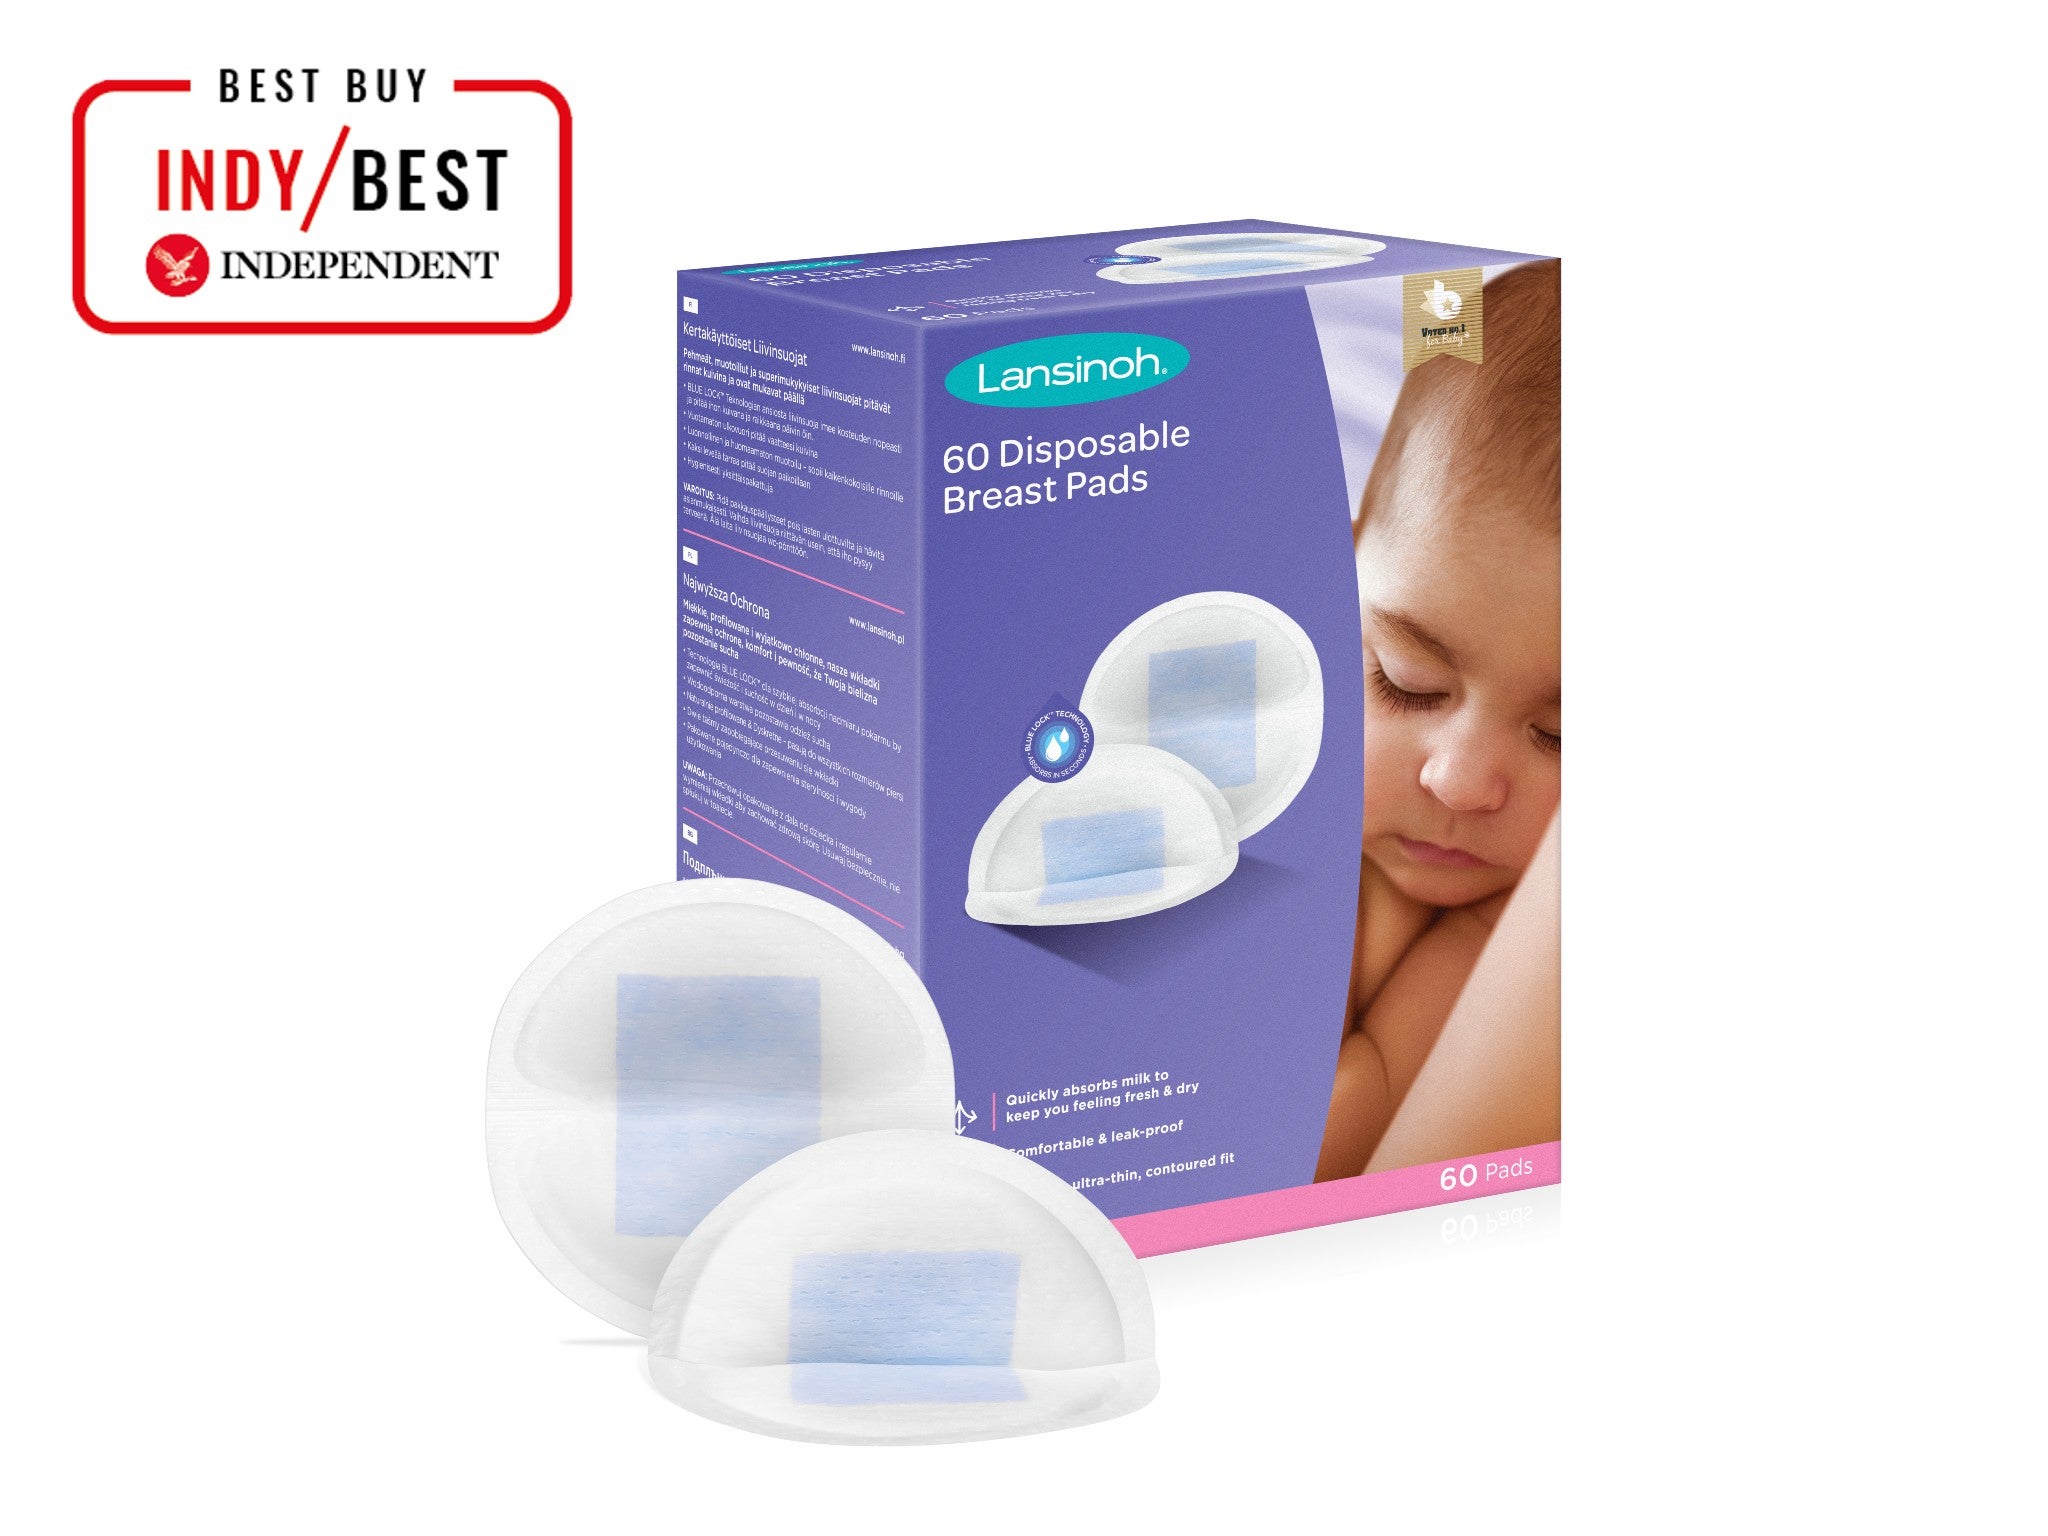 Lansinoh disposable breast pads indybest.jpg